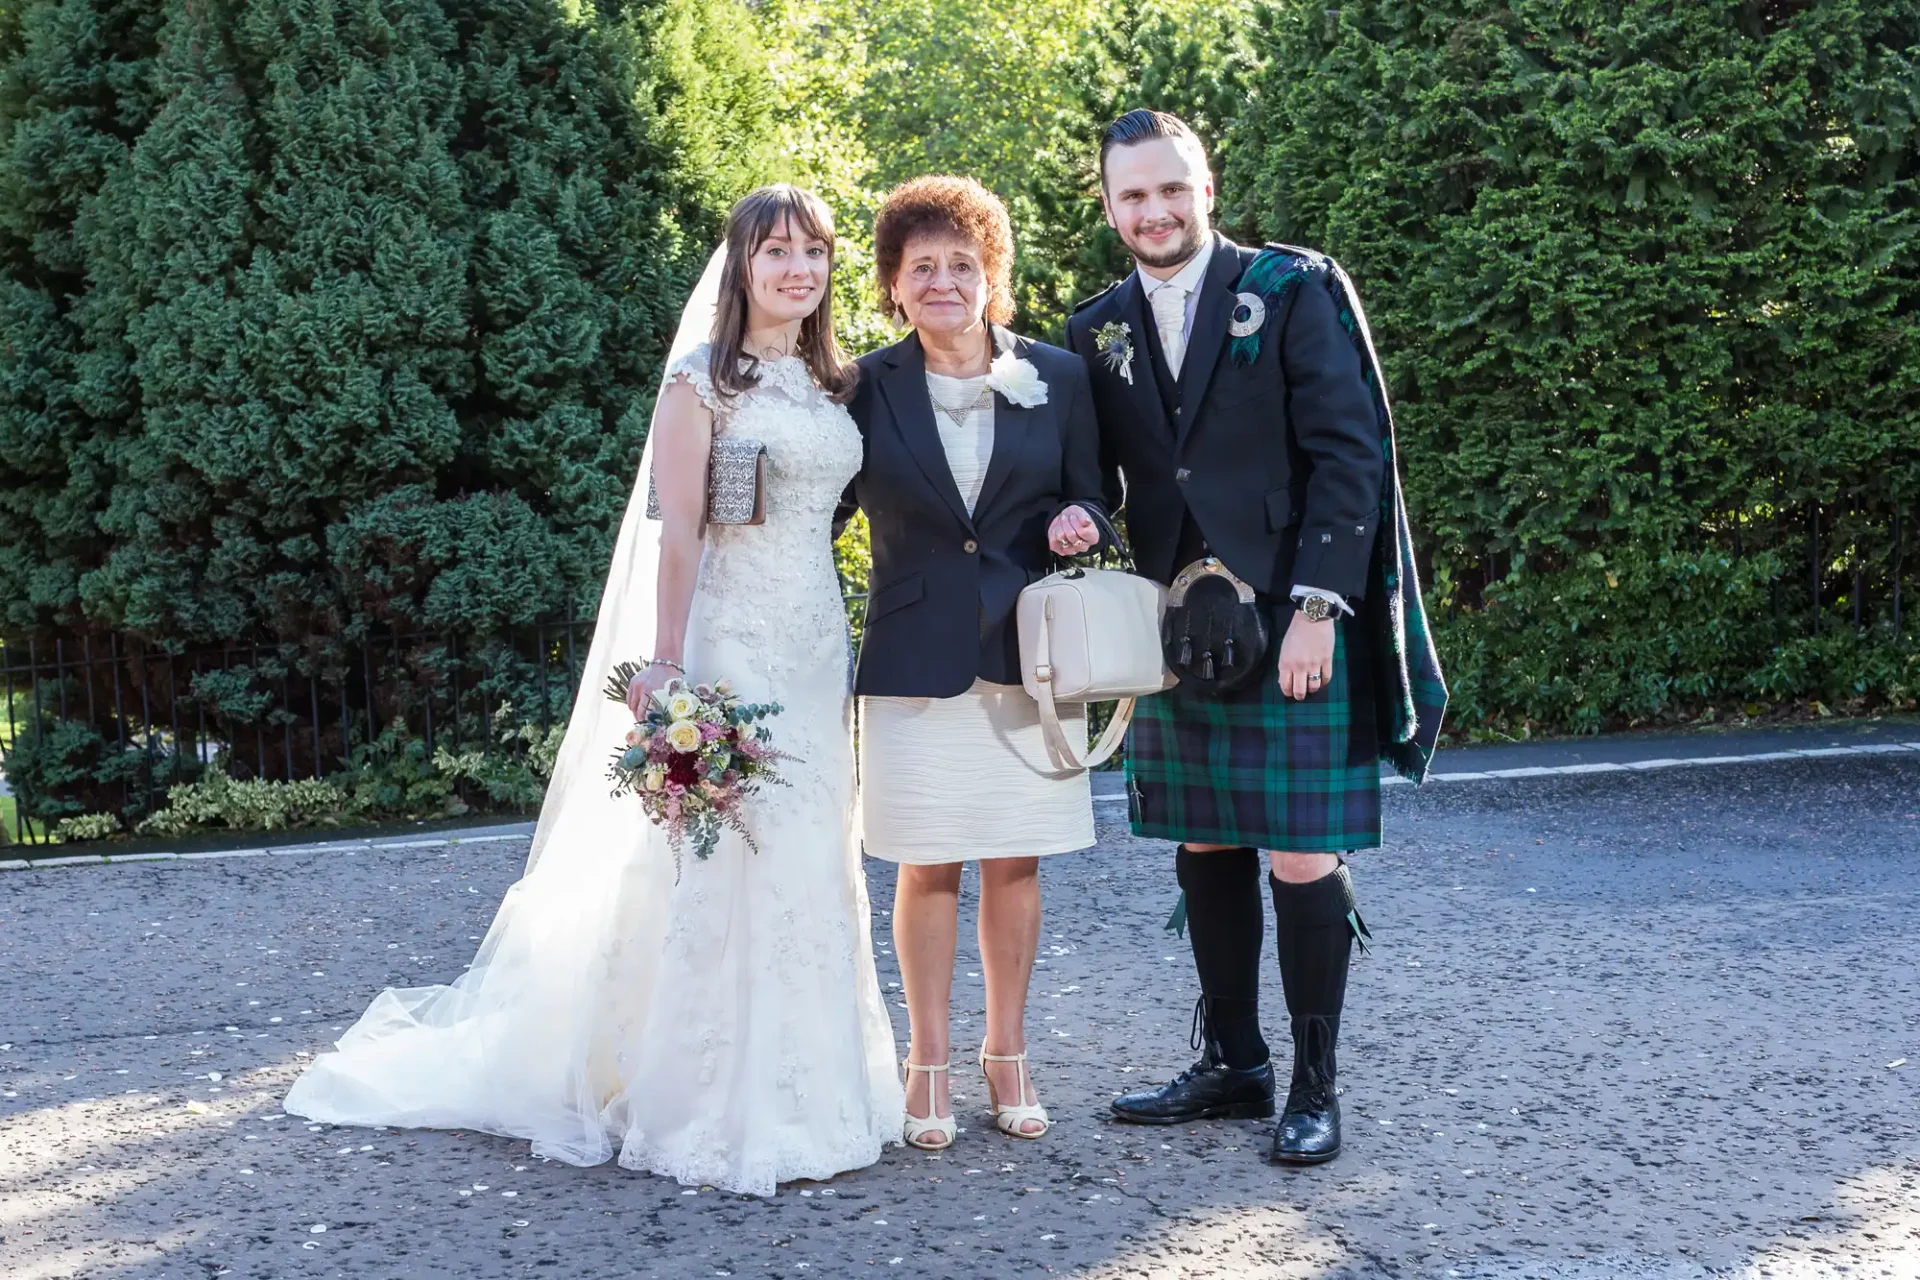 A bride in a white gown, a groom in a kilt, and an older woman in a cream dress posing together outdoors, with a backdrop of dense green shrubs.